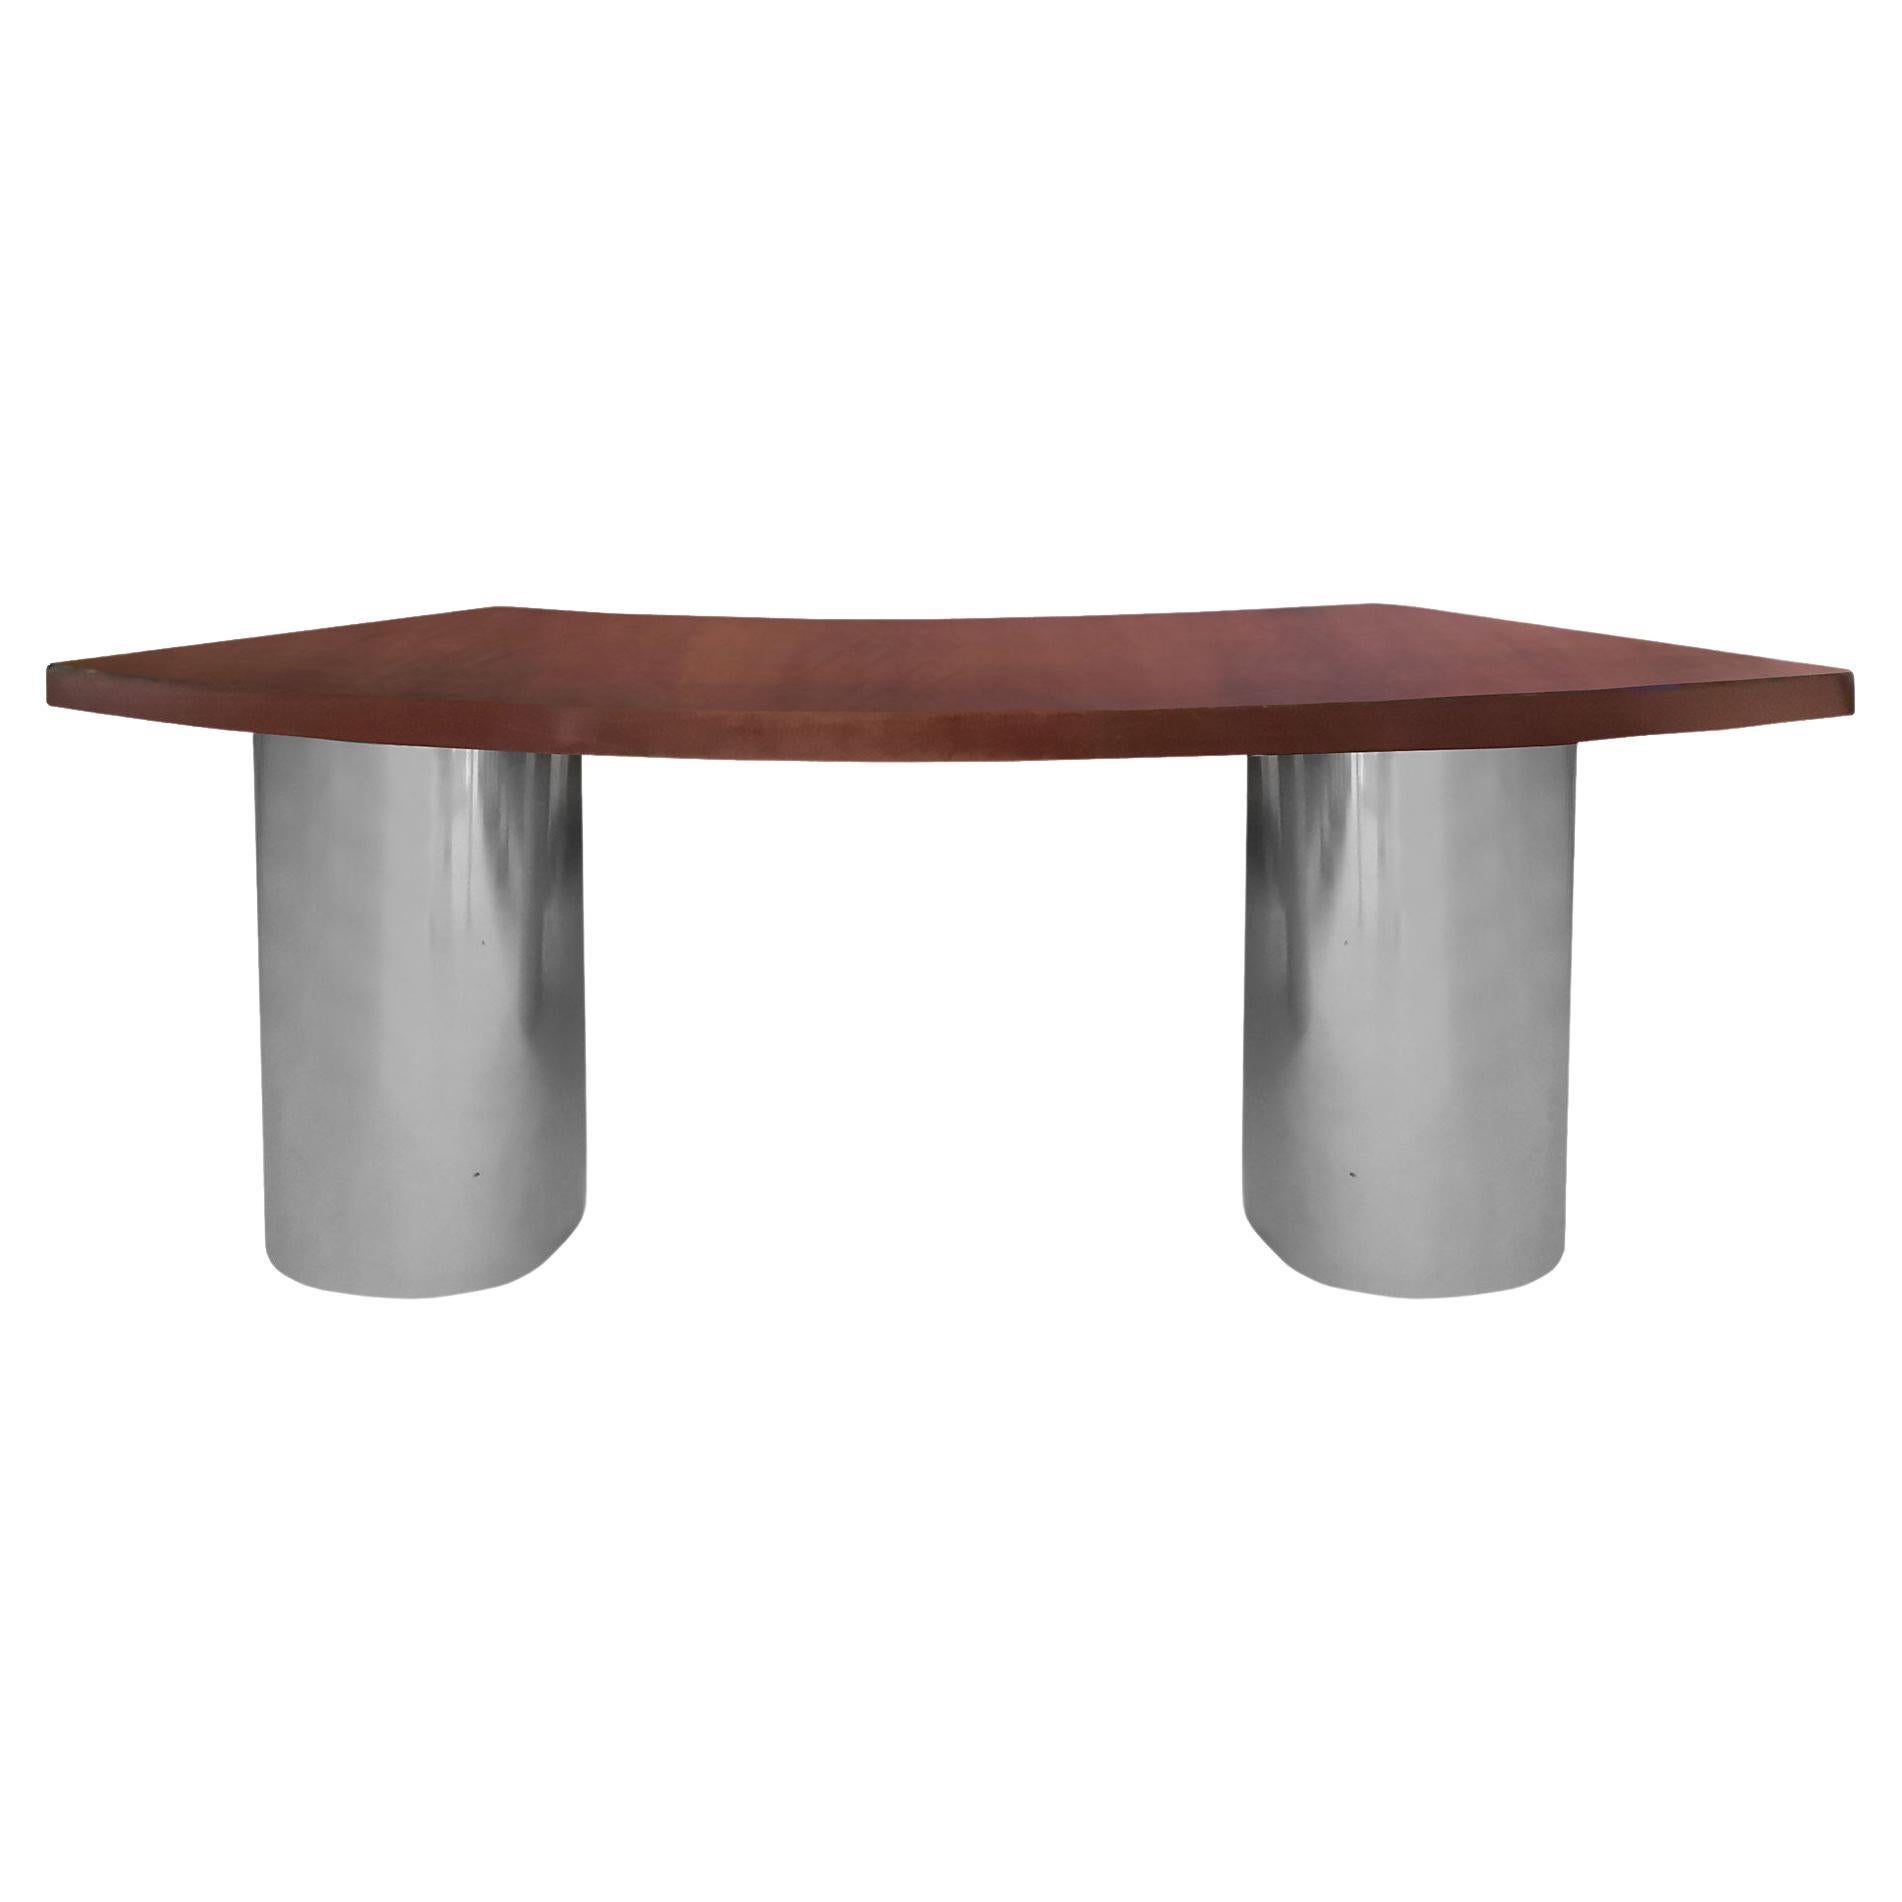 1970's "Boomerang" Desk in Walnut, Chrome Plated Steel and Glass - Italy For Sale